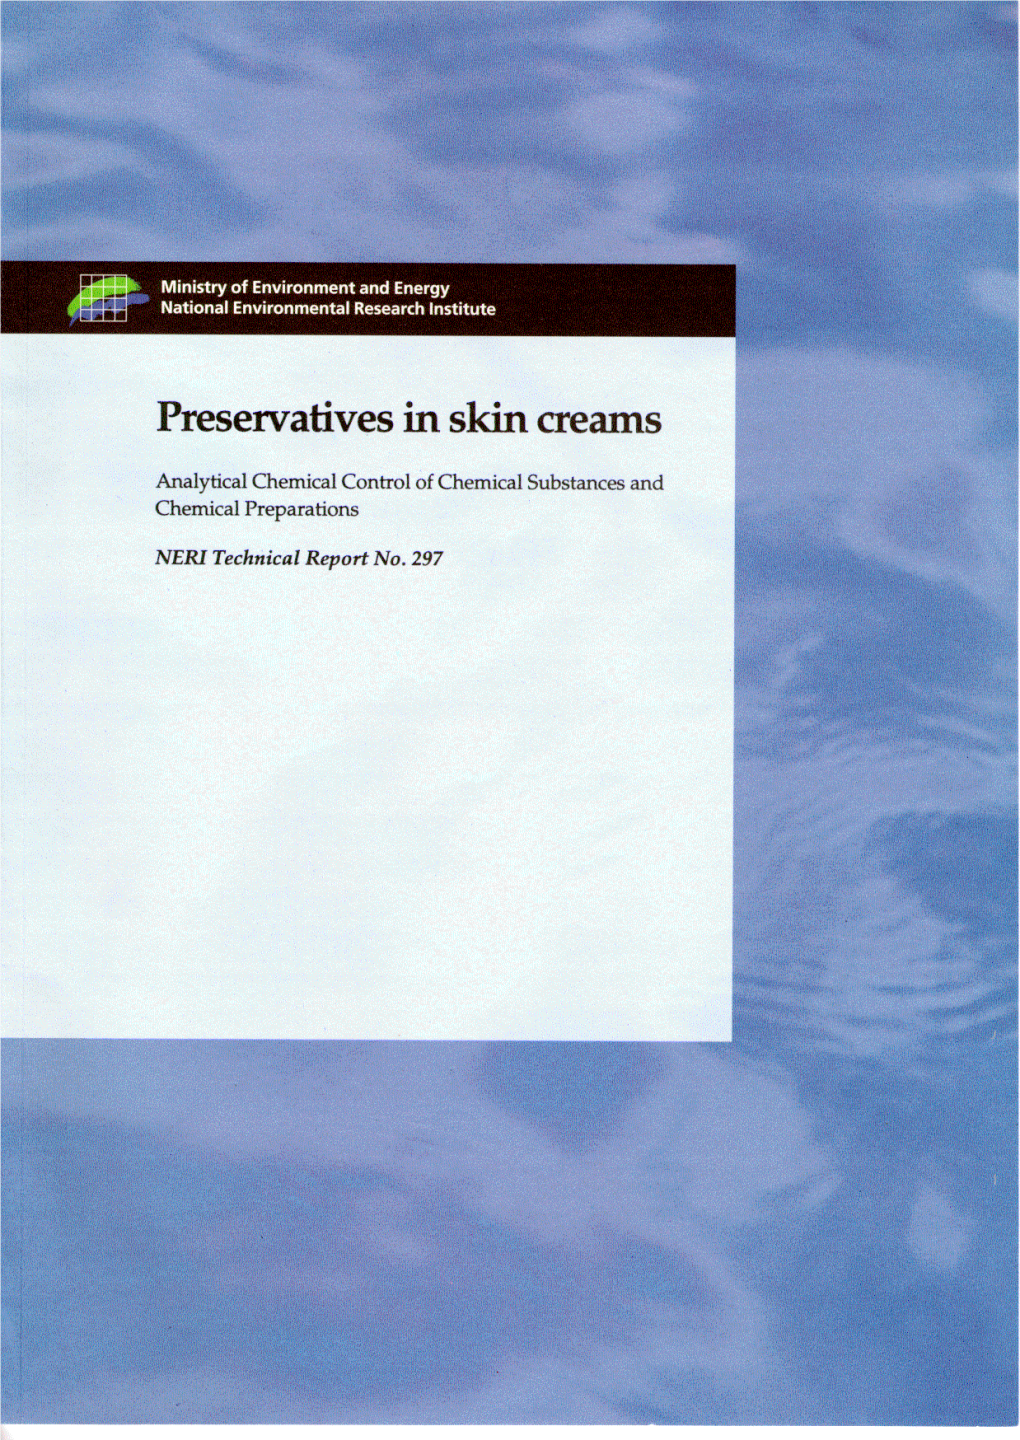 Preservatives in Skin Creams Subtitle: Analytical Chemical Control of Chemical Substances and Chemical Preparations